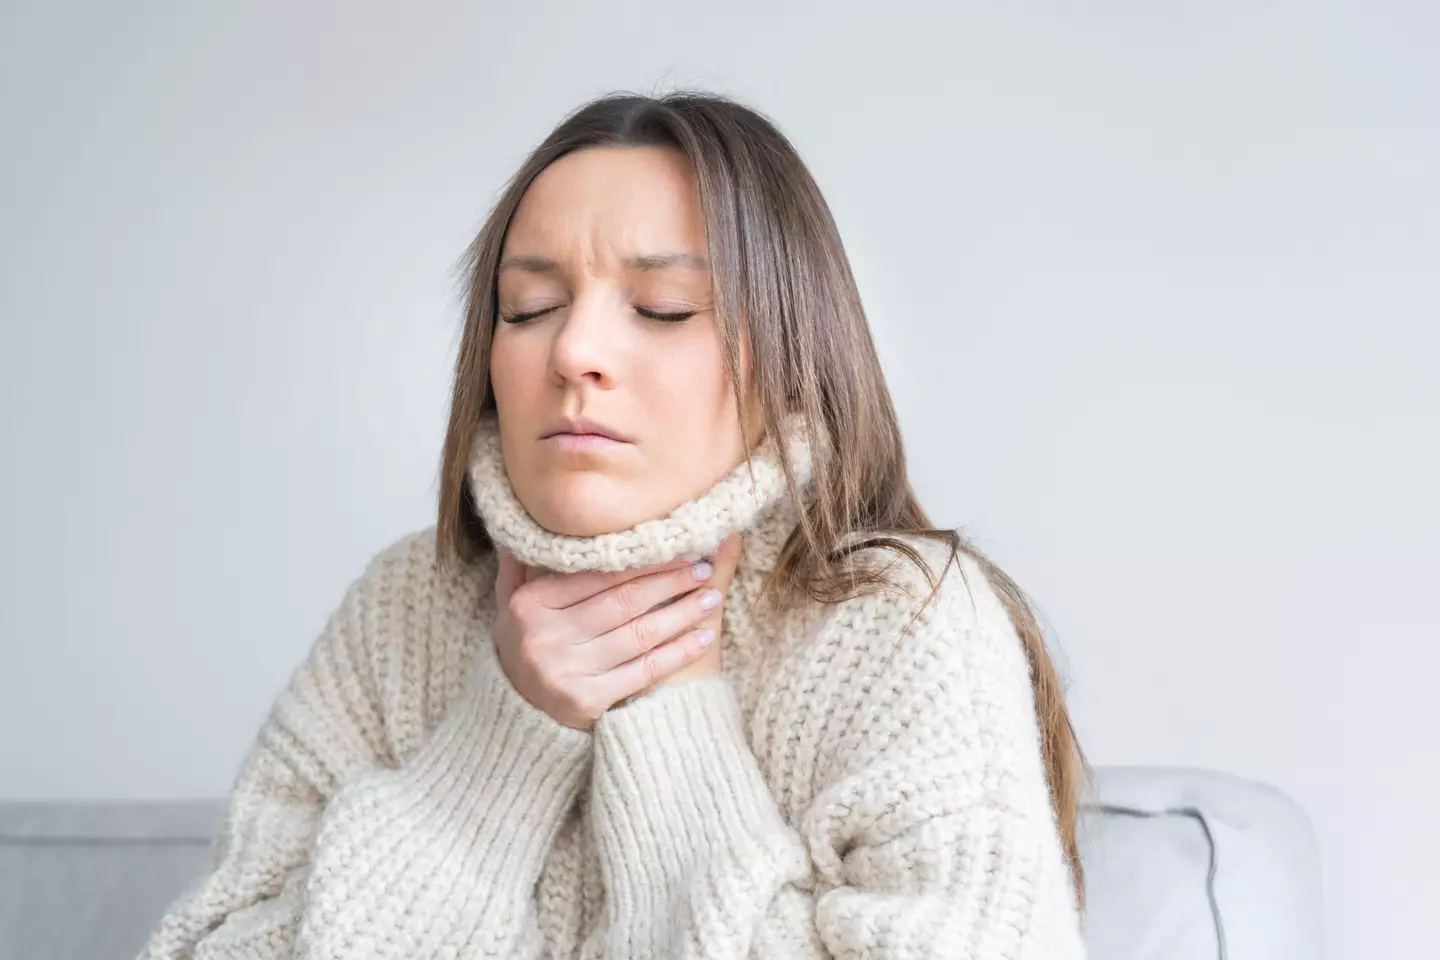 Some people may mistake a sore throat for a cold symptom even if they have recently performed oral sex (